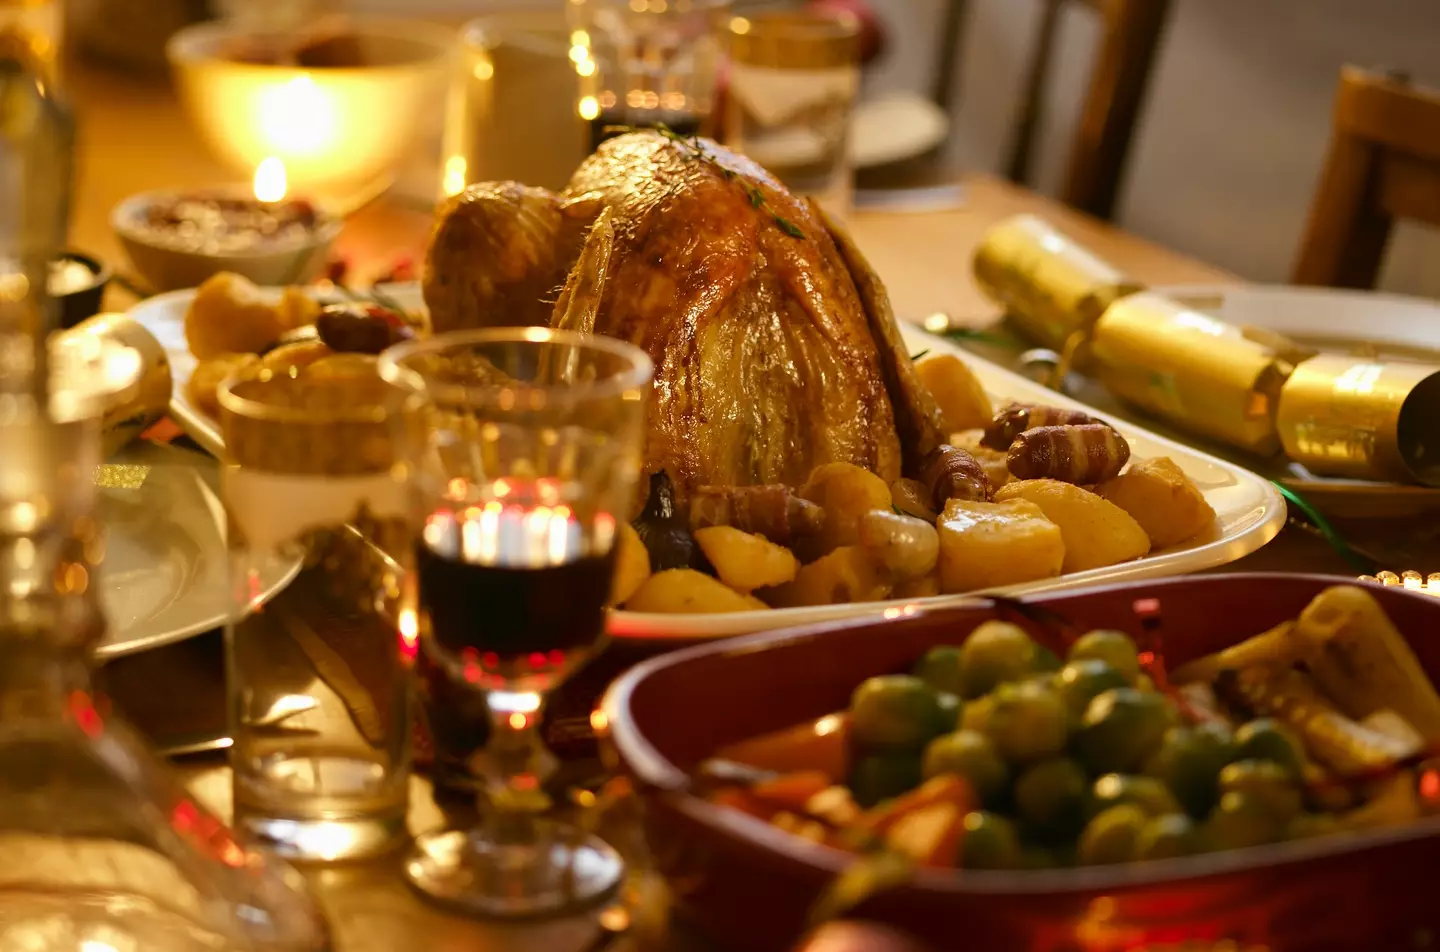 The woman revealed she is 'more than happy' to pay £100 for the Christmas dinner.